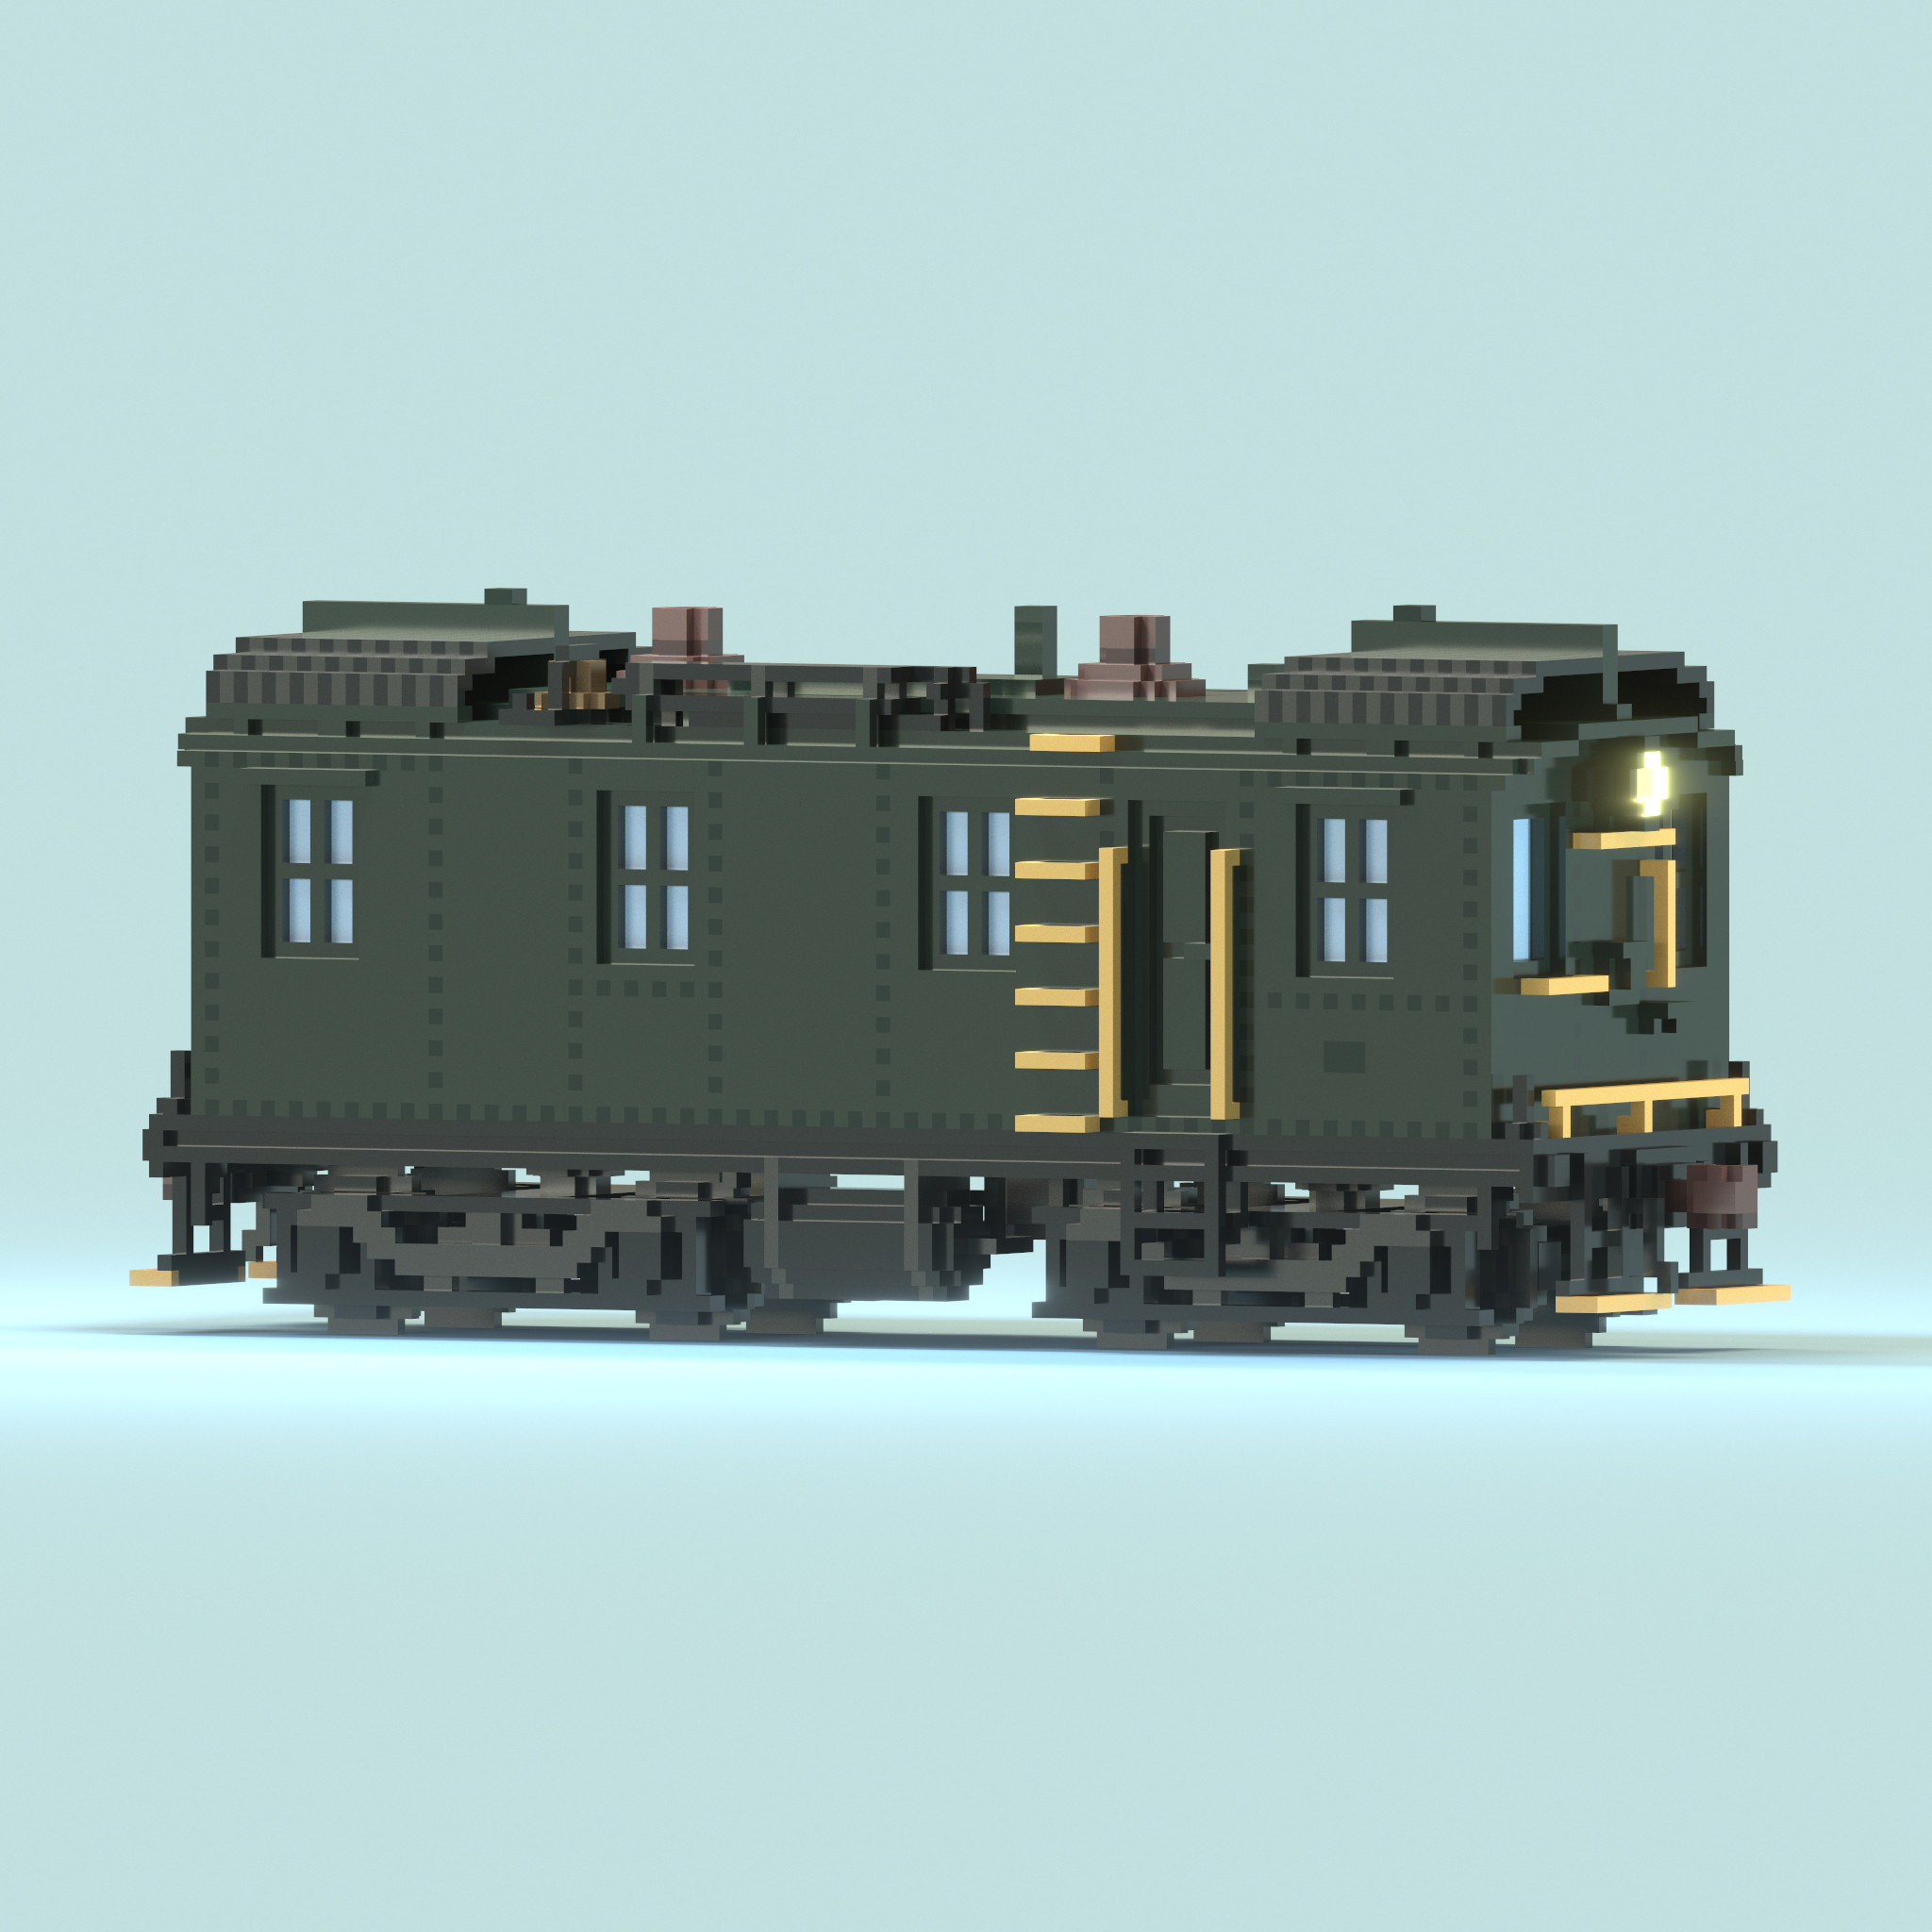 Side profile of Central Railroad of New Jersey No. 1000 locomotive, modeled and rendered in Magicavoxel.